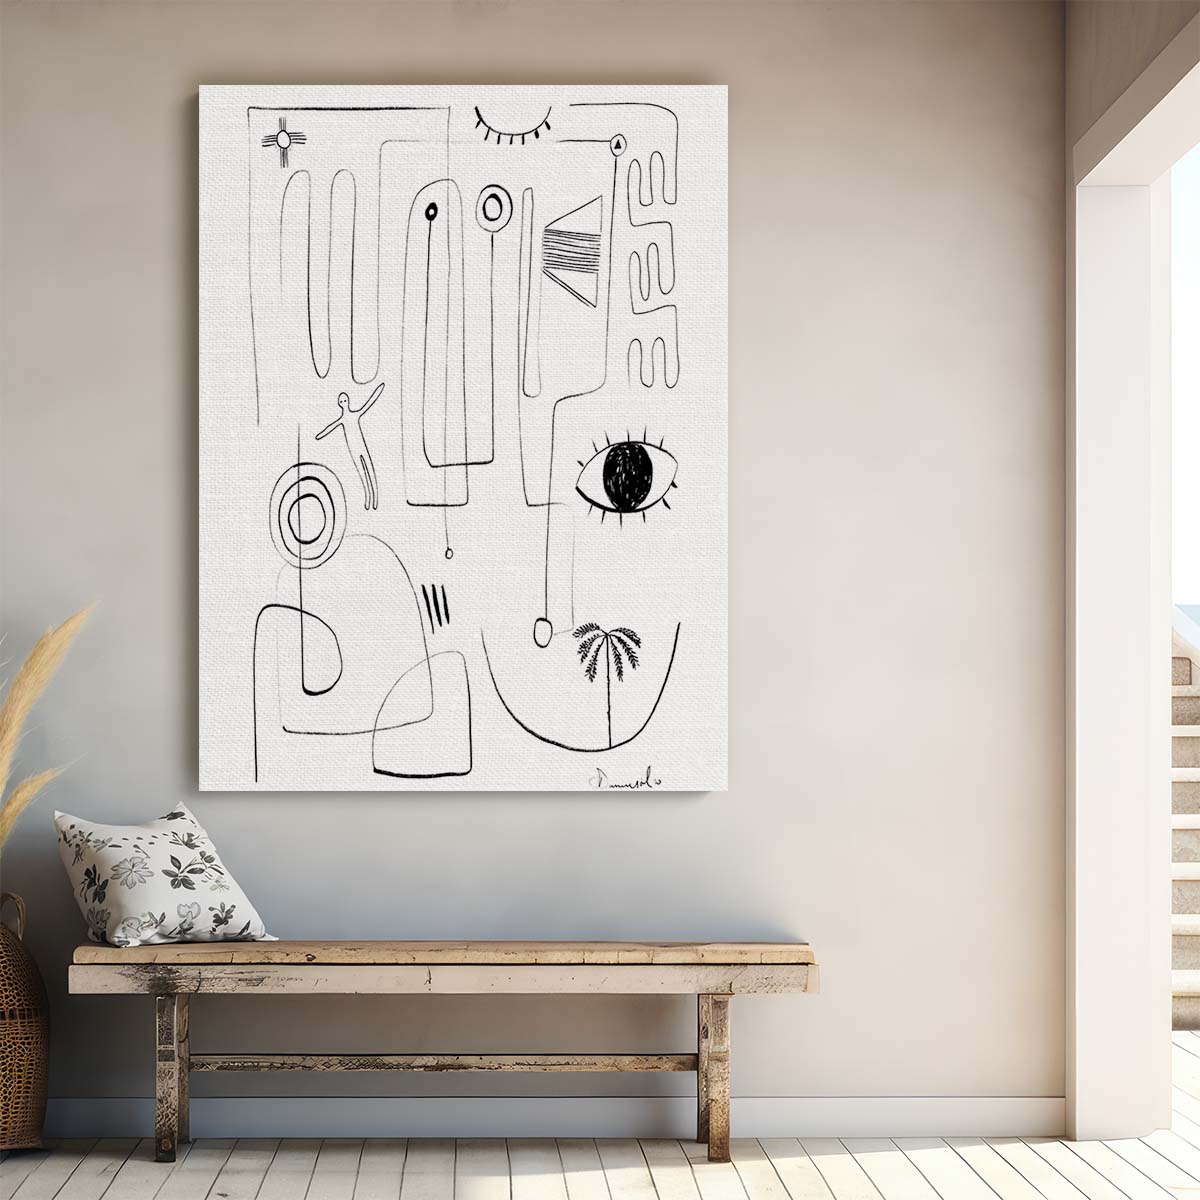 Dan Hobday Monochrome Abstract Illustration - Eye & Palm Tree Line Art by Luxuriance Designs, made in USA